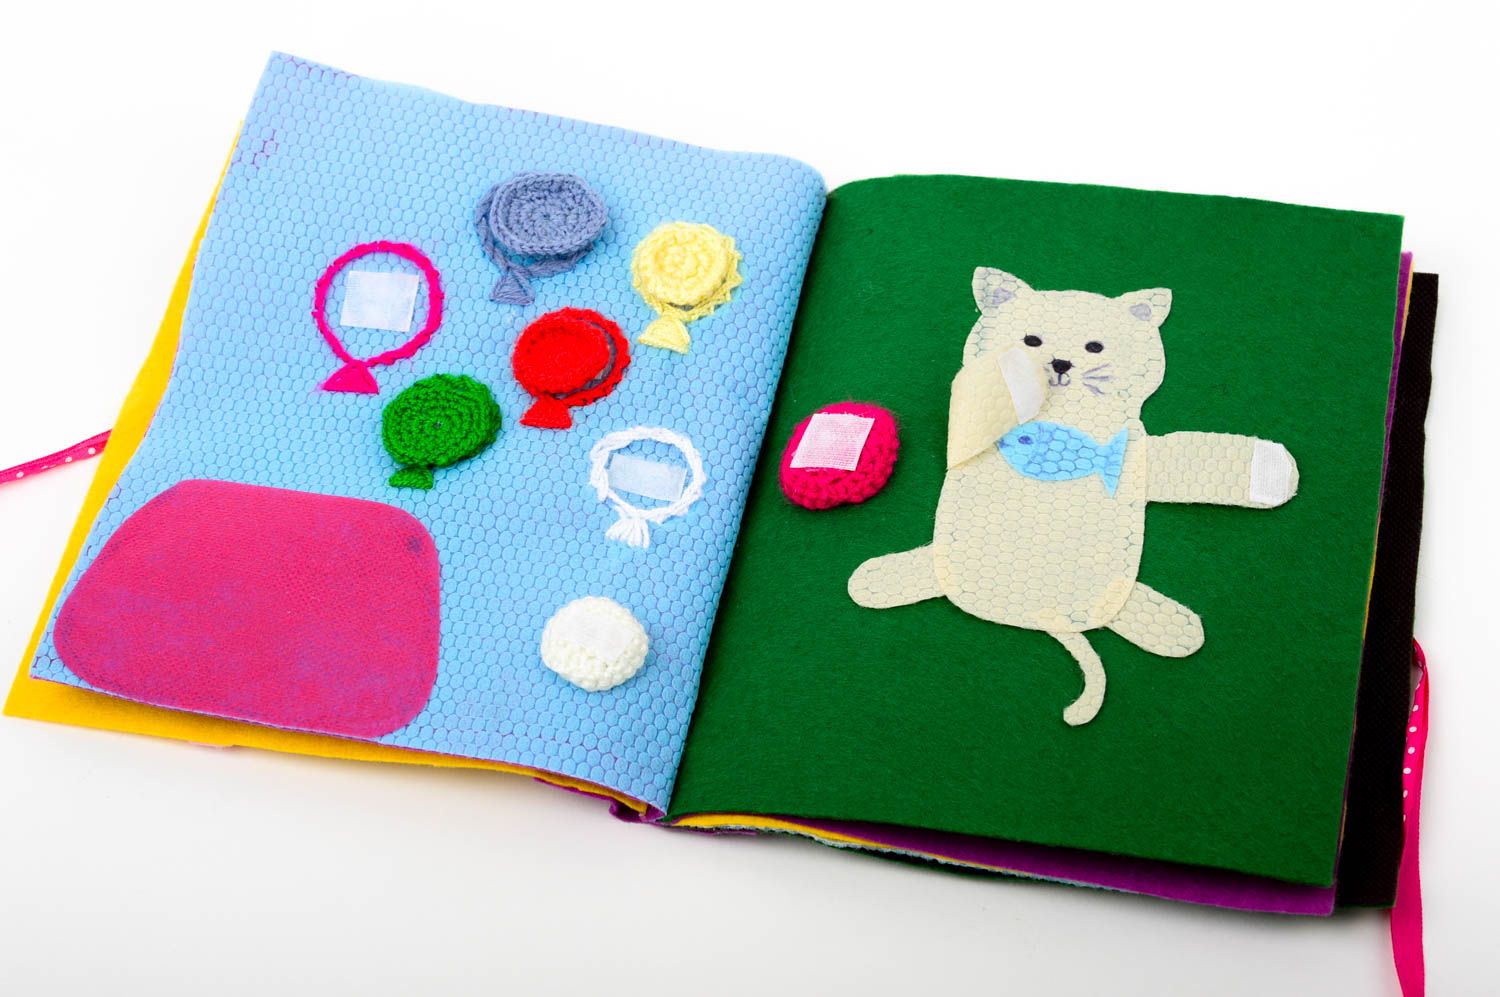 Handmade education toy for kids soft toy toy book learning toys for toddlers photo 4